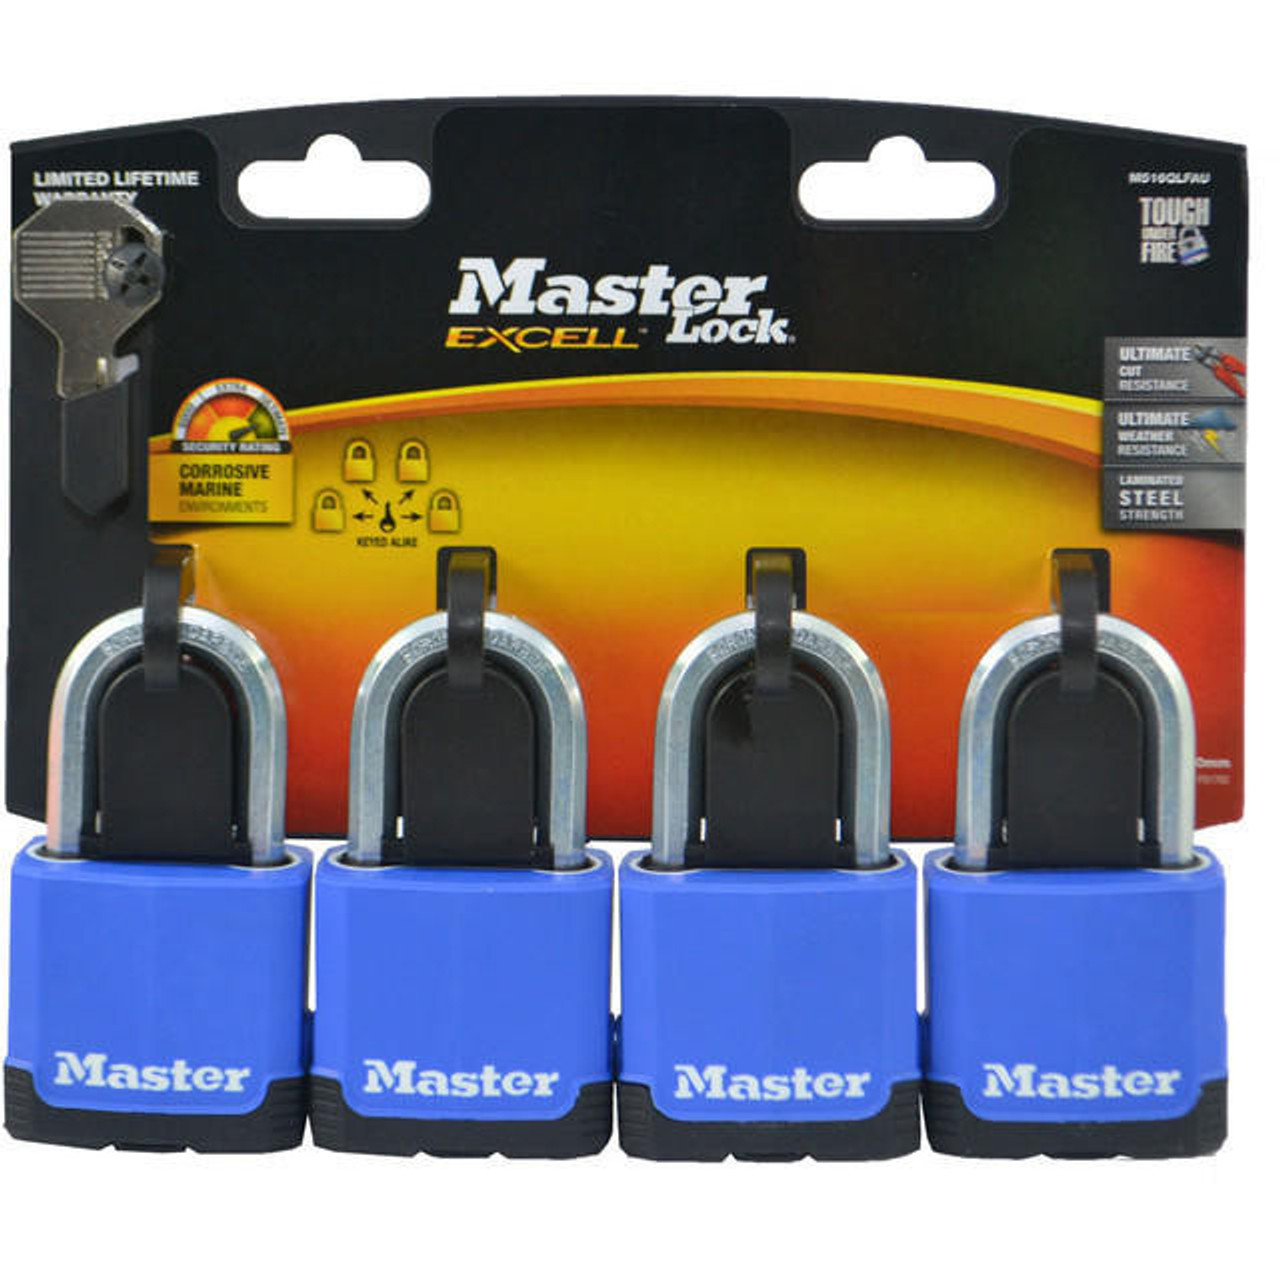 Master Lock Master Excell Padlock 4 Pack 50mm Shackle - M516QLFAU